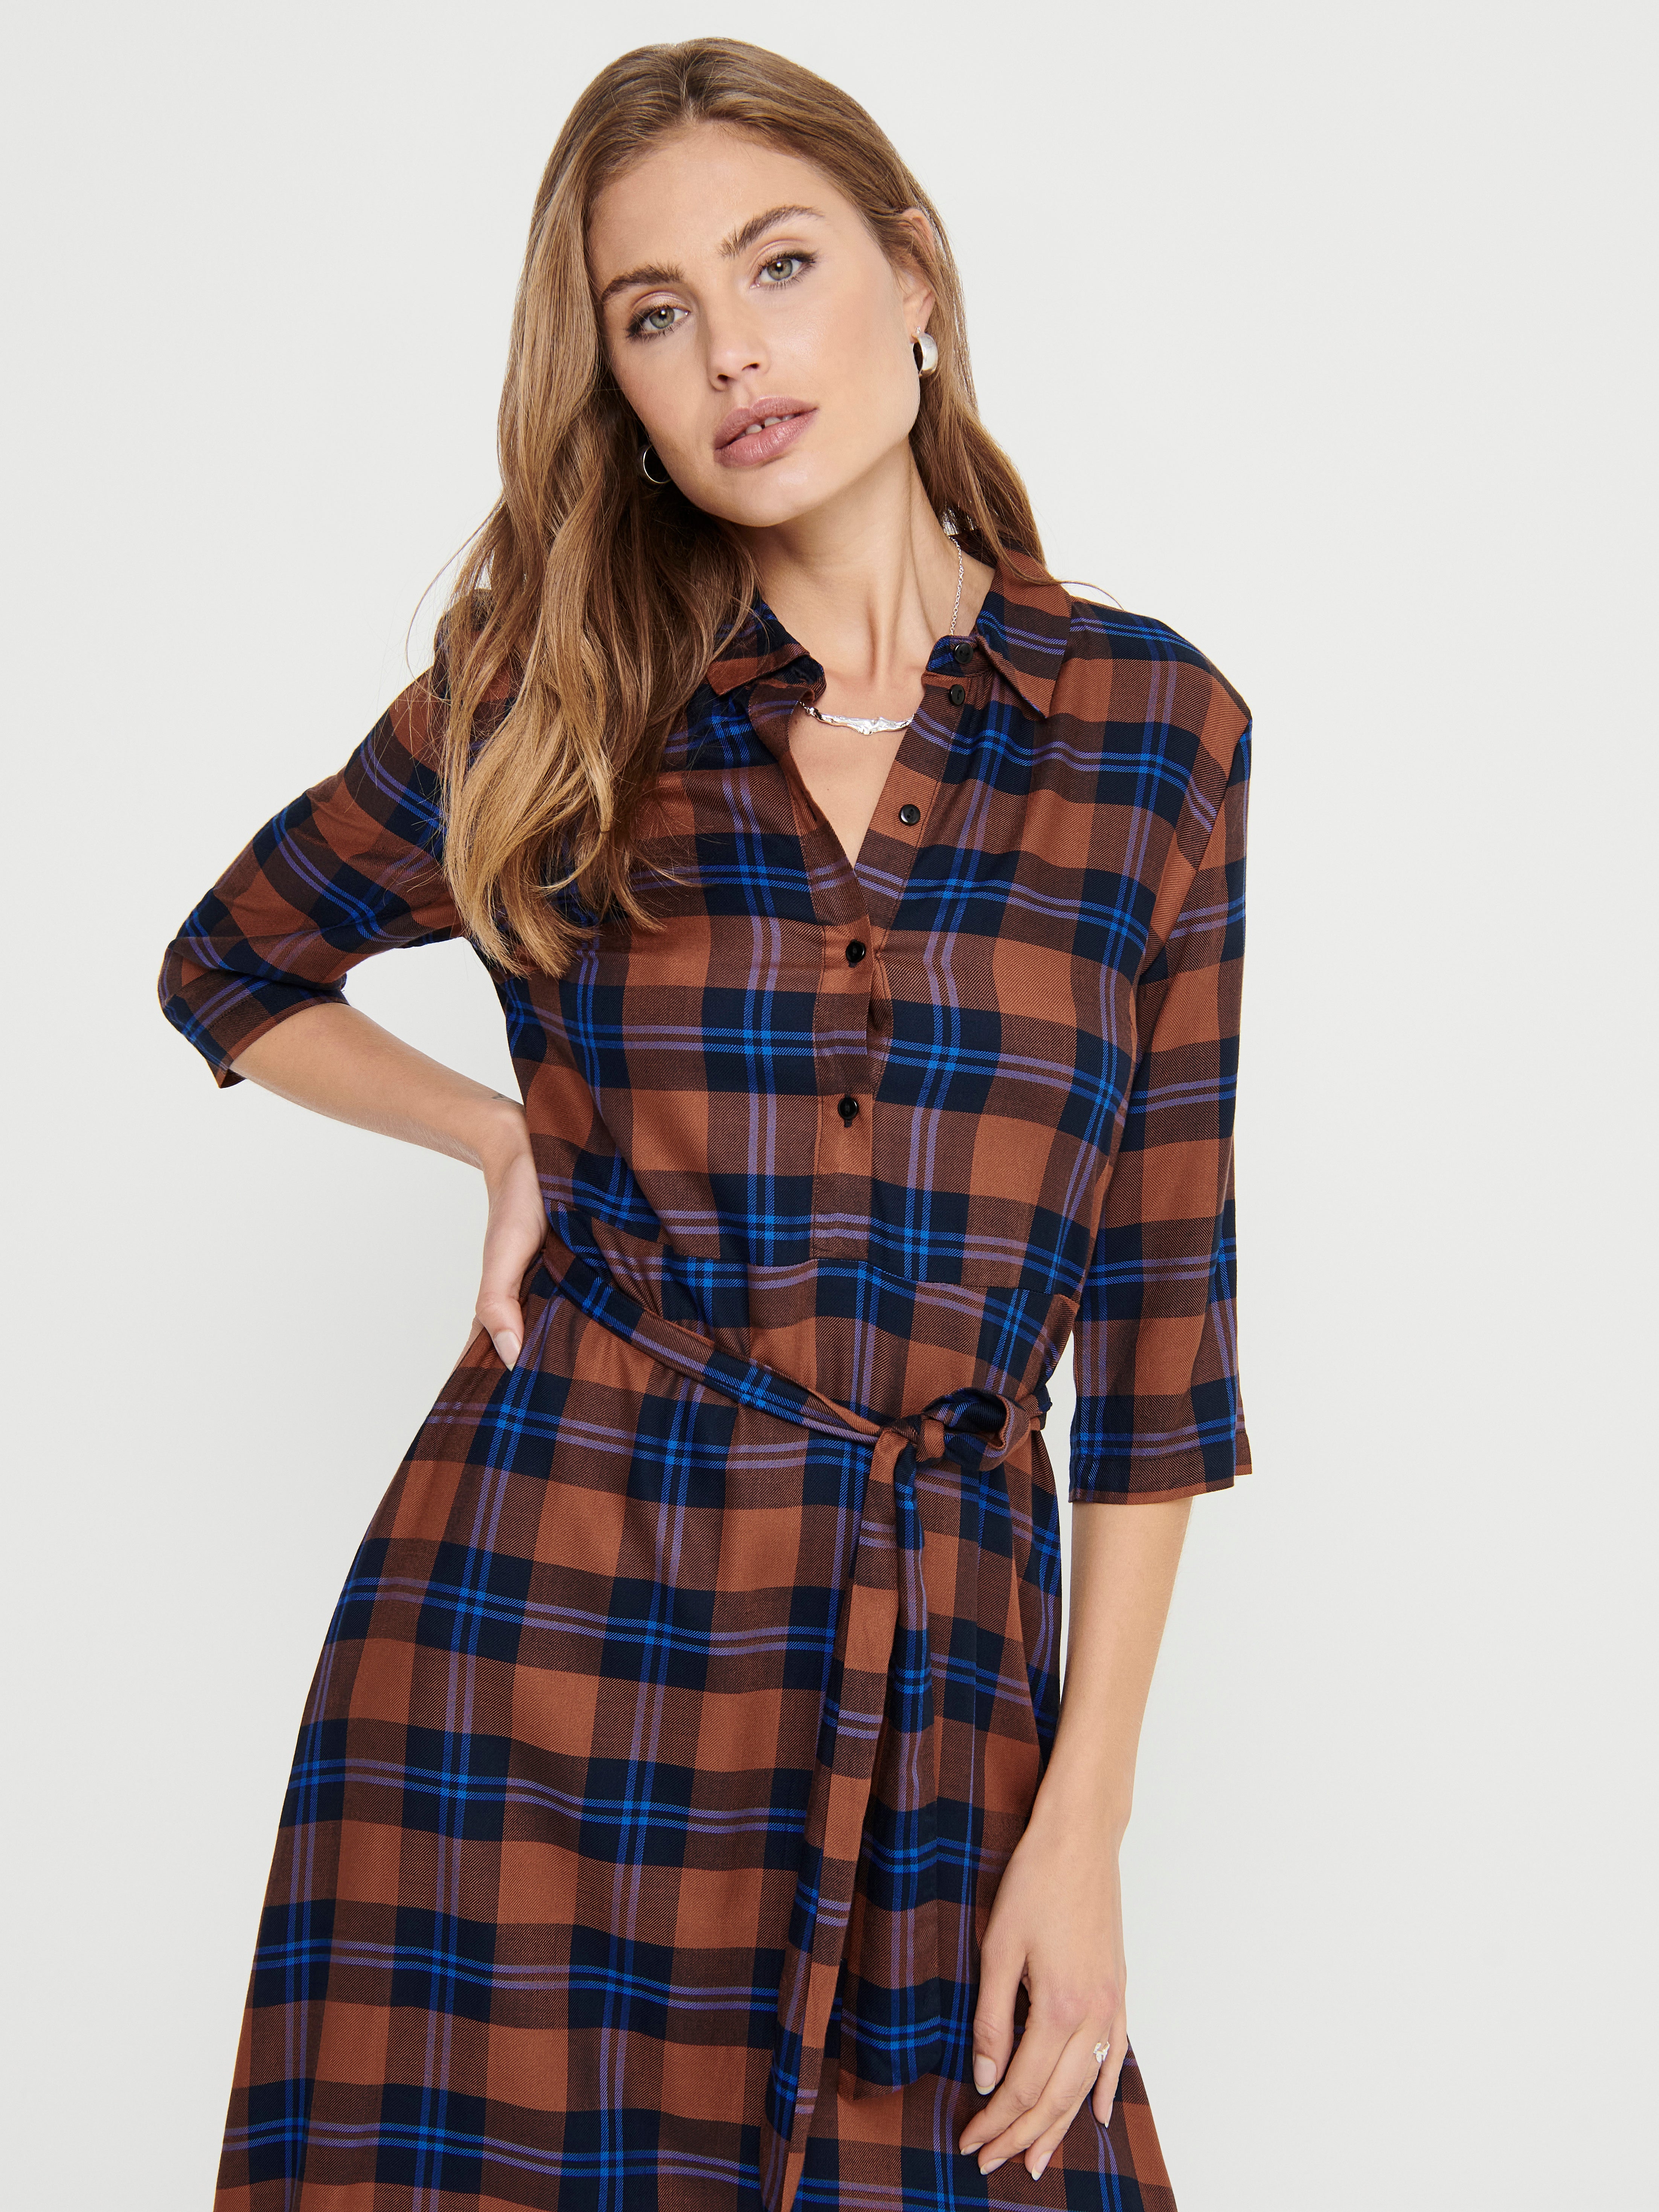 Checked 35% | Shirt ONLY® with dress discount!